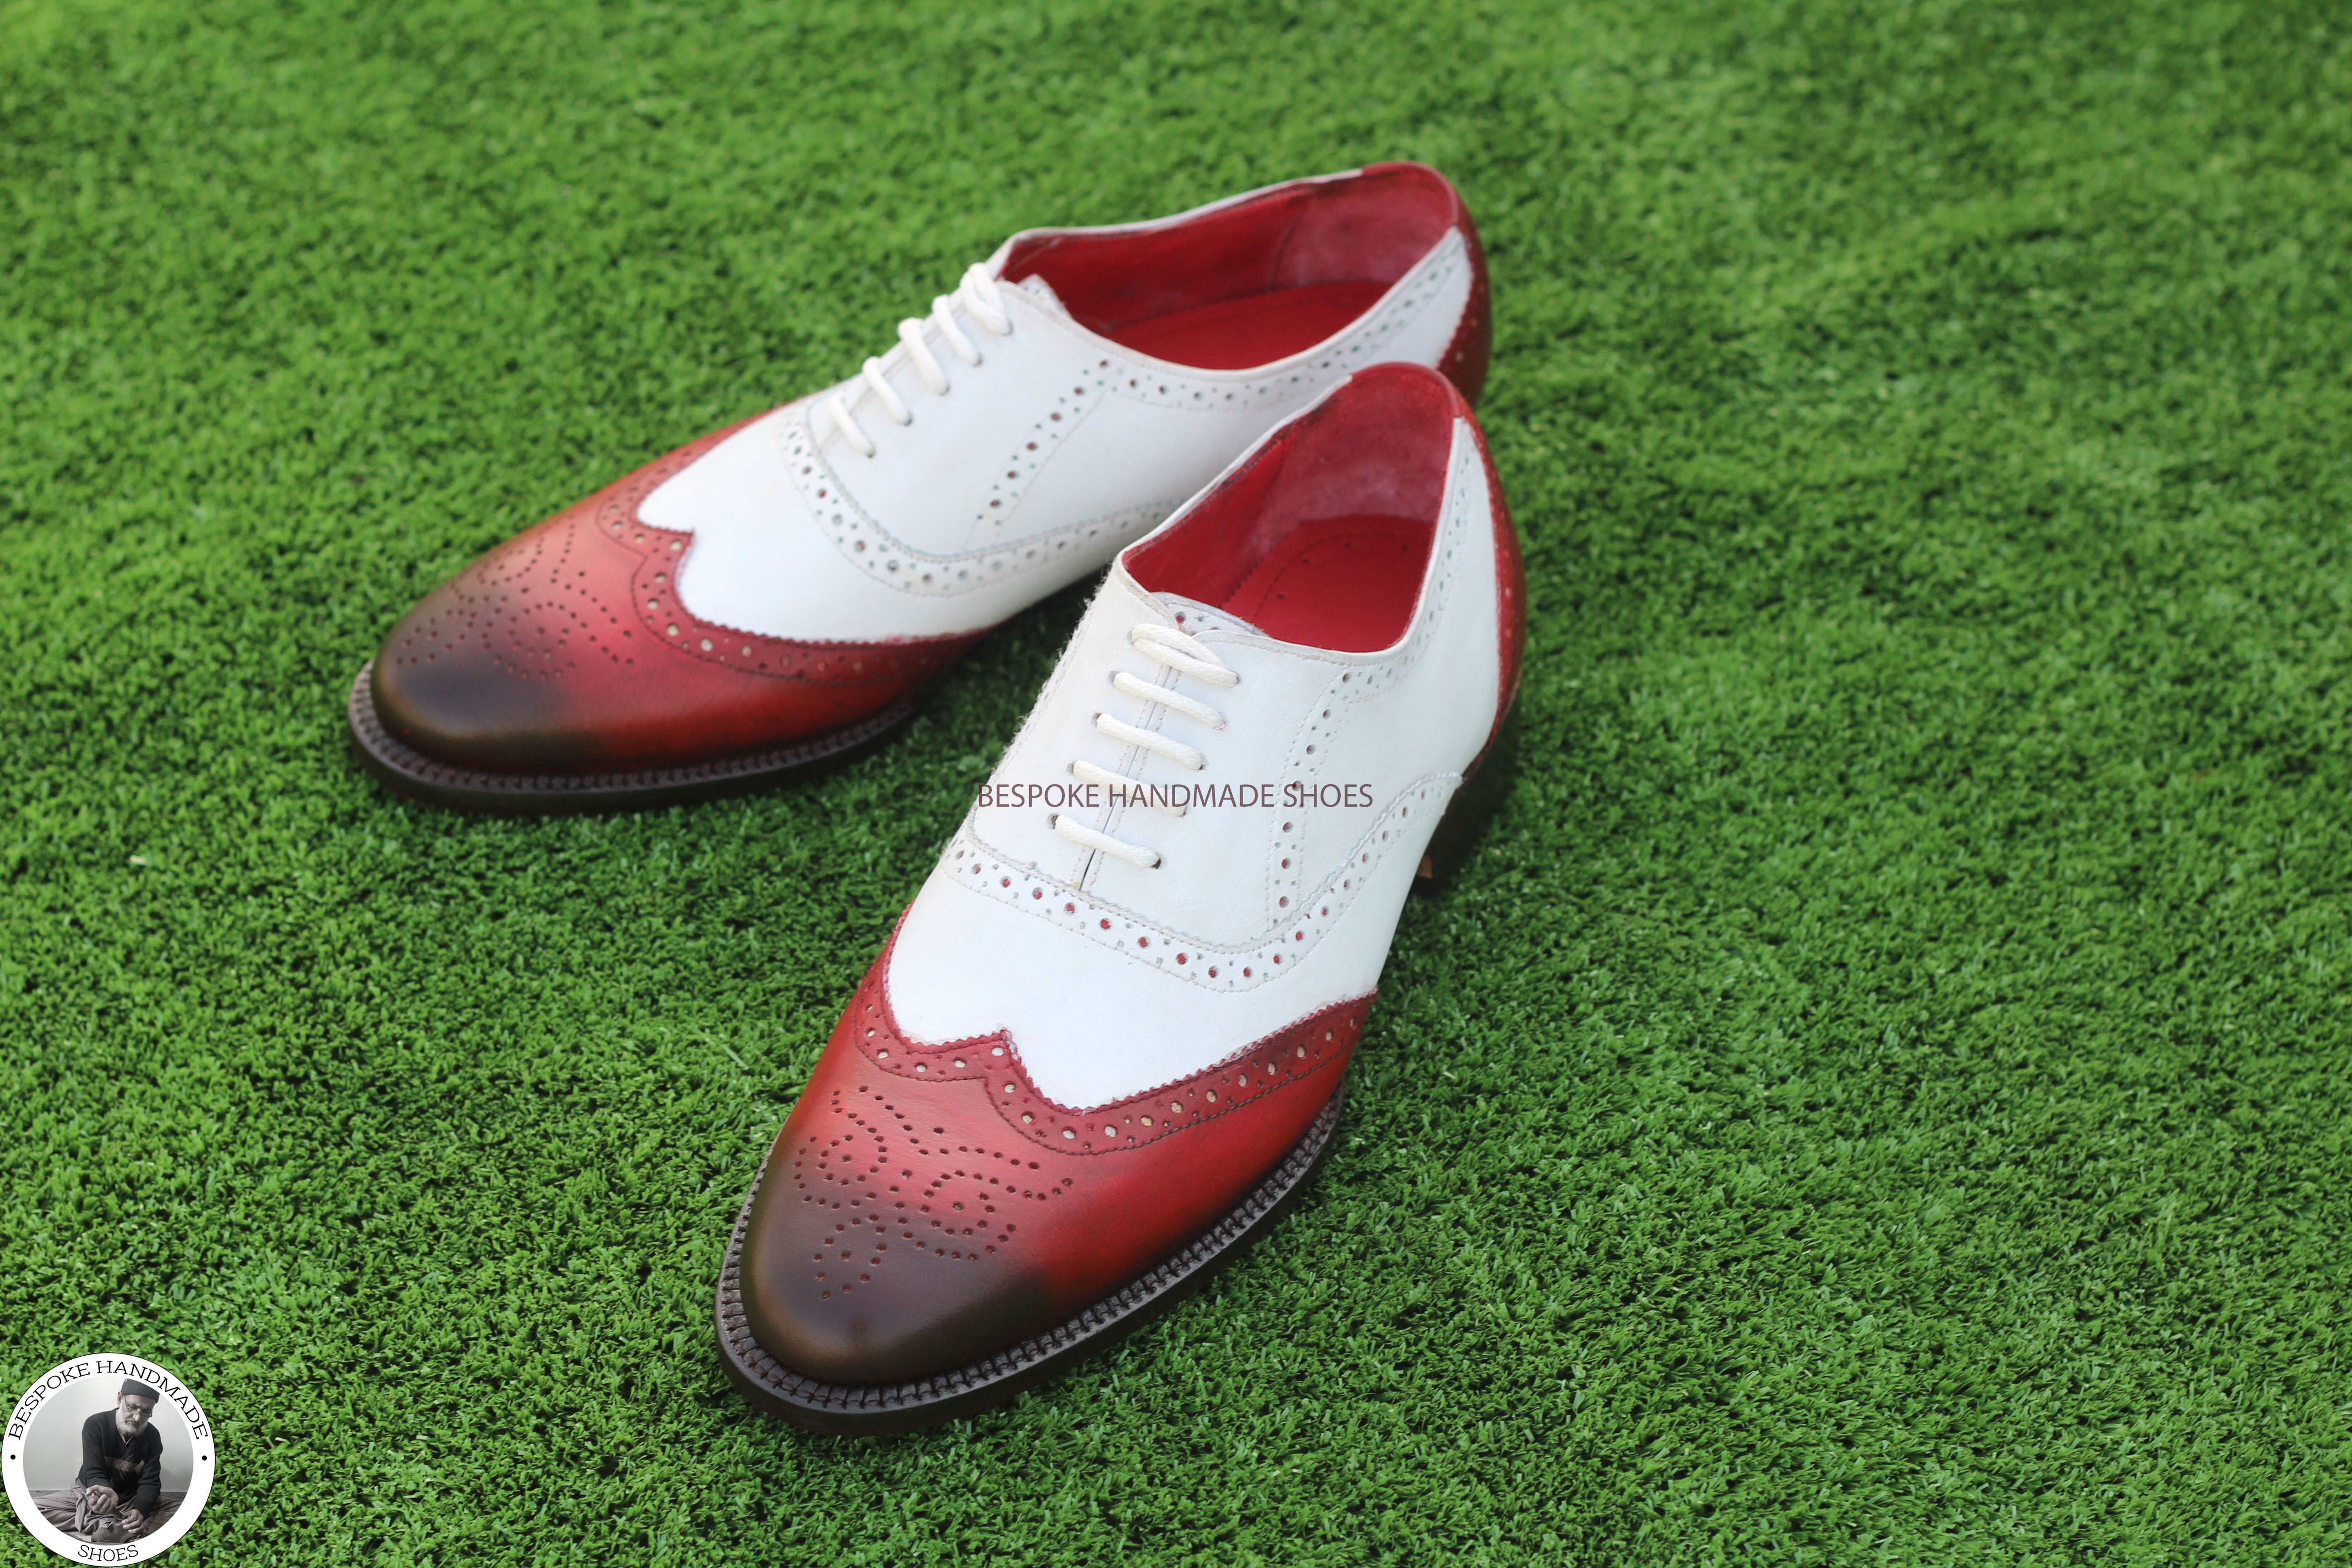 Bespoke Handmade White & Red Leather Black Shaded Oxford Wingtip Brogue Lace up Men's Shoes